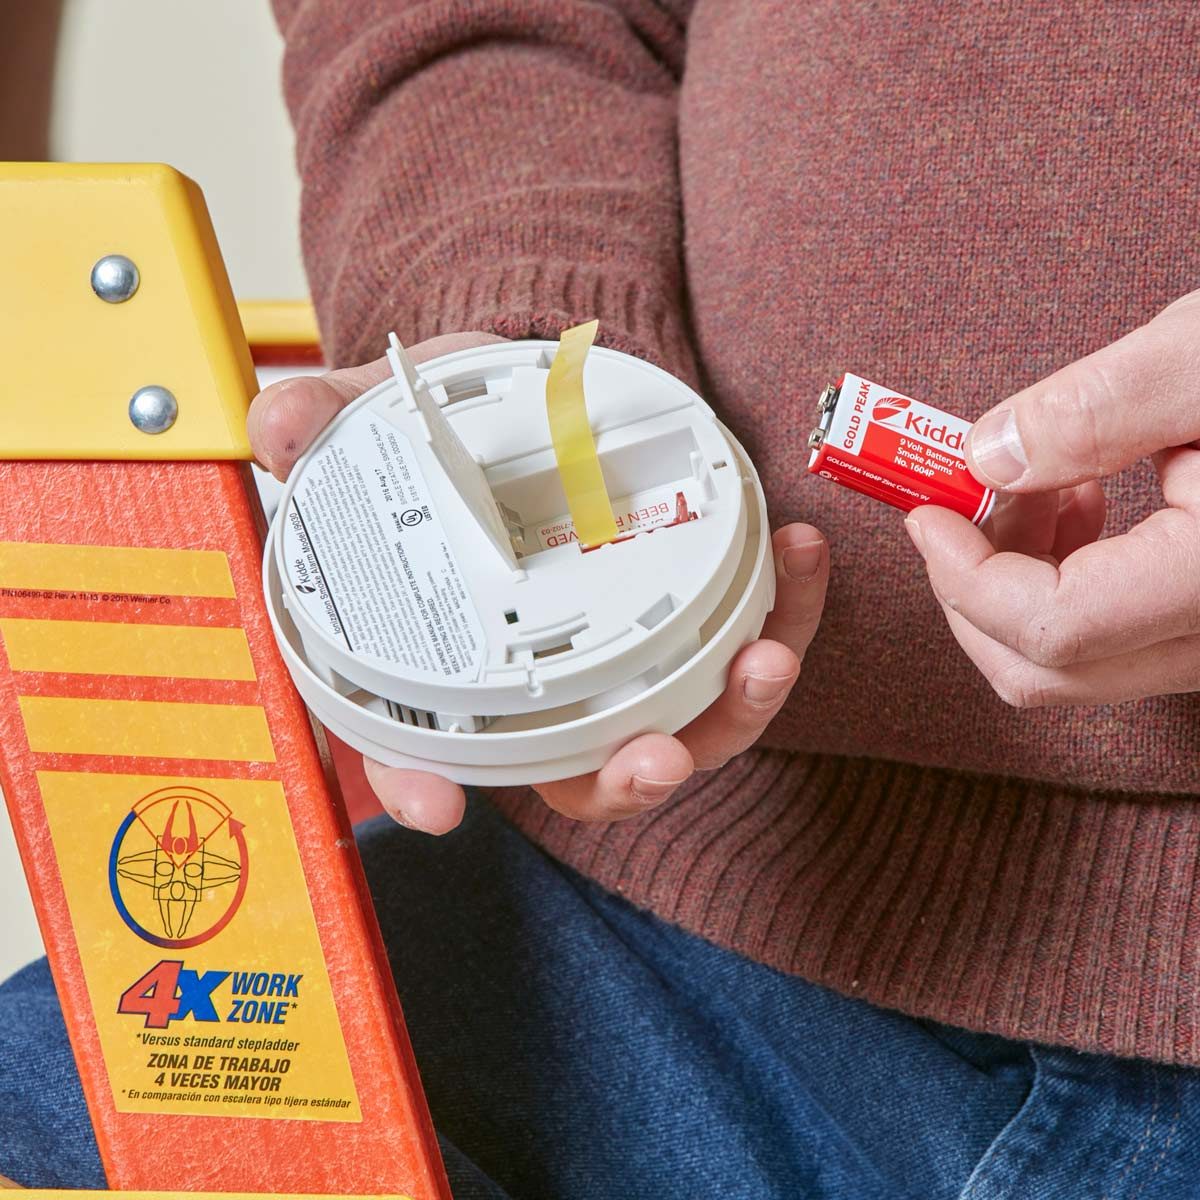 <p>You're probably aware you're supposed to check the <a href="https://www.familyhandyman.com/article/when-to-replace-your-smoke-detector-batteries/">batteries in your smoke</a> and <a href="https://www.familyhandyman.com/article/about-smart-carbon-monoxide-detectors/">carbon monoxide detectors</a> regularly. But are you actually following these <a href="https://www.usfa.fema.gov/prevention/outreach/smoke_alarms.html#:~:text=Test%20the%20alarm%20monthly.,smoke%20alarm%20every%2010%20years." rel="noopener noreferrer">when-to-check-and-replace safety guidelines from the U.S. Fire Administration?</a></p> <p>"Most people don't test them until they start chirping," says McKusker.</p> <p>Electricians, however, are really good about keeping up with this task, because they know the stakes are high if they put it off. Namely, you might sleep through a fire or fail to recognize a <a href="https://www.familyhandyman.com/list/tips-to-keep-your-home-safe-from-carbon-monoxide-poisoning/">carbon monoxide leak.</a> The rules, which apply to <em>all</em> smoke and CO detectors (even those that are hard-wired into your home's electrical system) are straightforward:</p> <p>• Check your smoke detector and CO detector batteries once a month;</p> <p>• Replace the batteries once a year, even if they still seem to be working;</p> <p>• <a href="https://www.nfpa.org/smokealarms" rel="noopener noreferrer">Replace the entire unit every 10 years</a> because the devices are only designed to last a decade.</p>